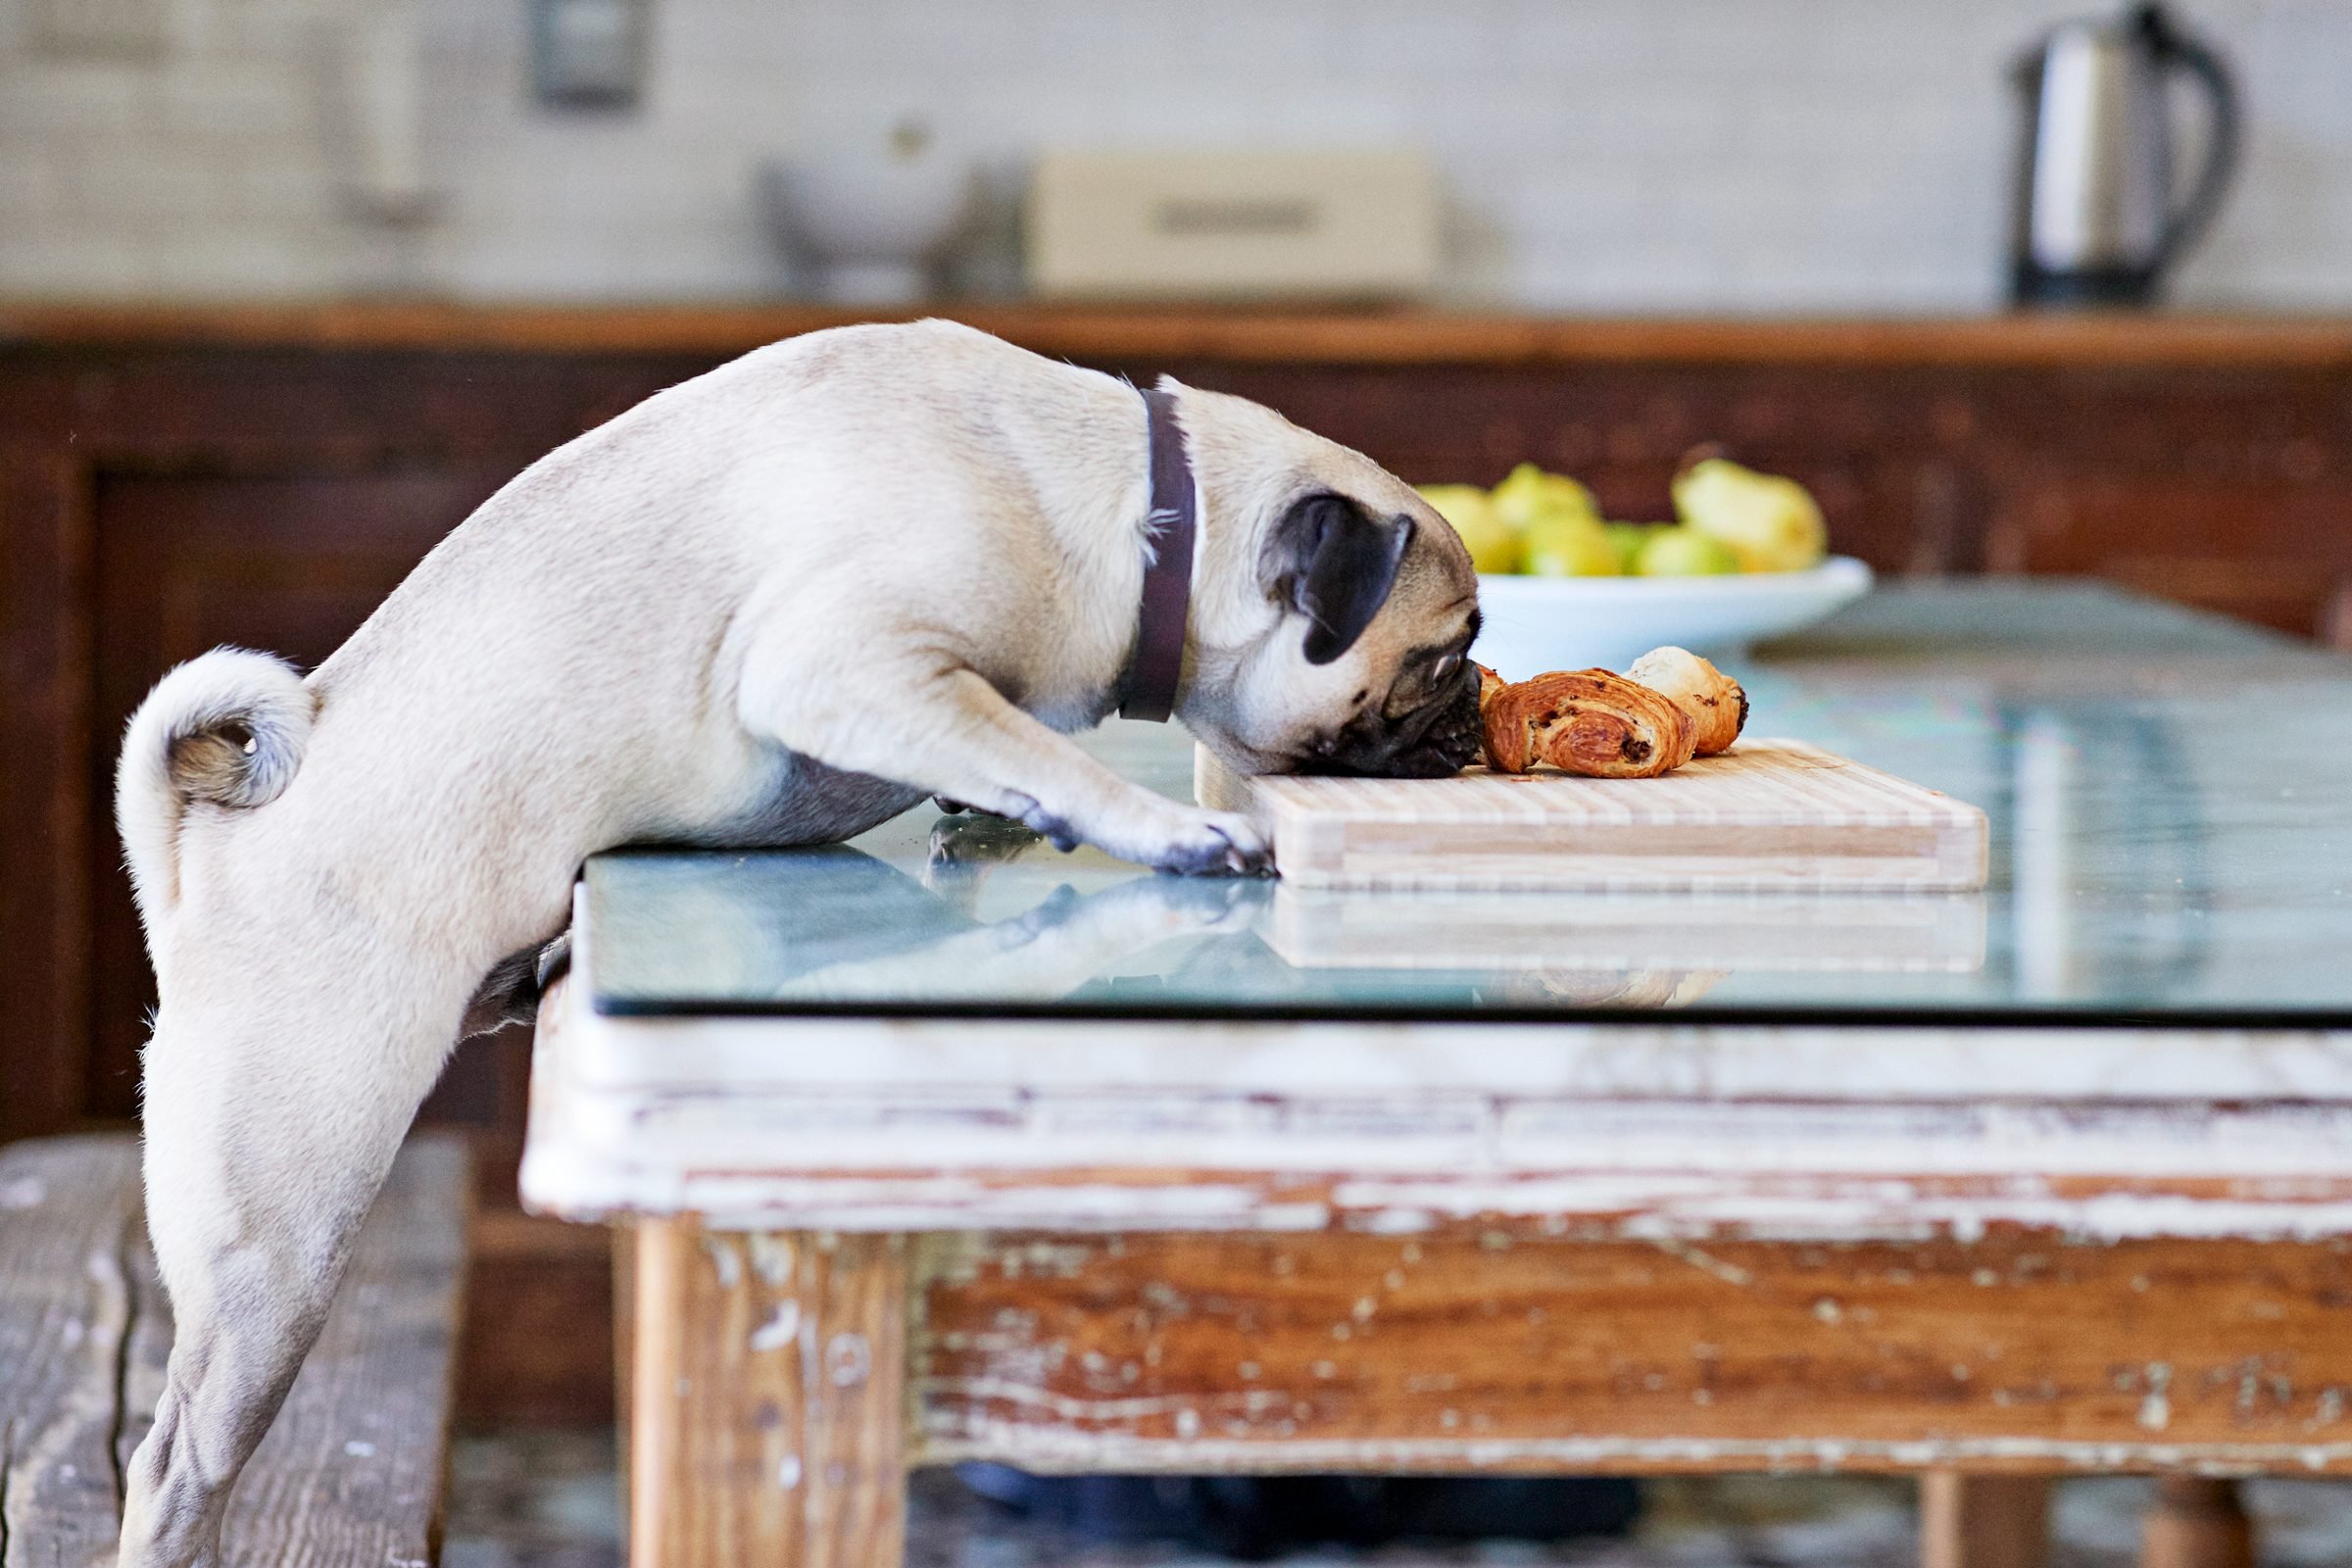 18 Foods Dogs Can't Eat — Toxic Foods for Dogs to Avoid